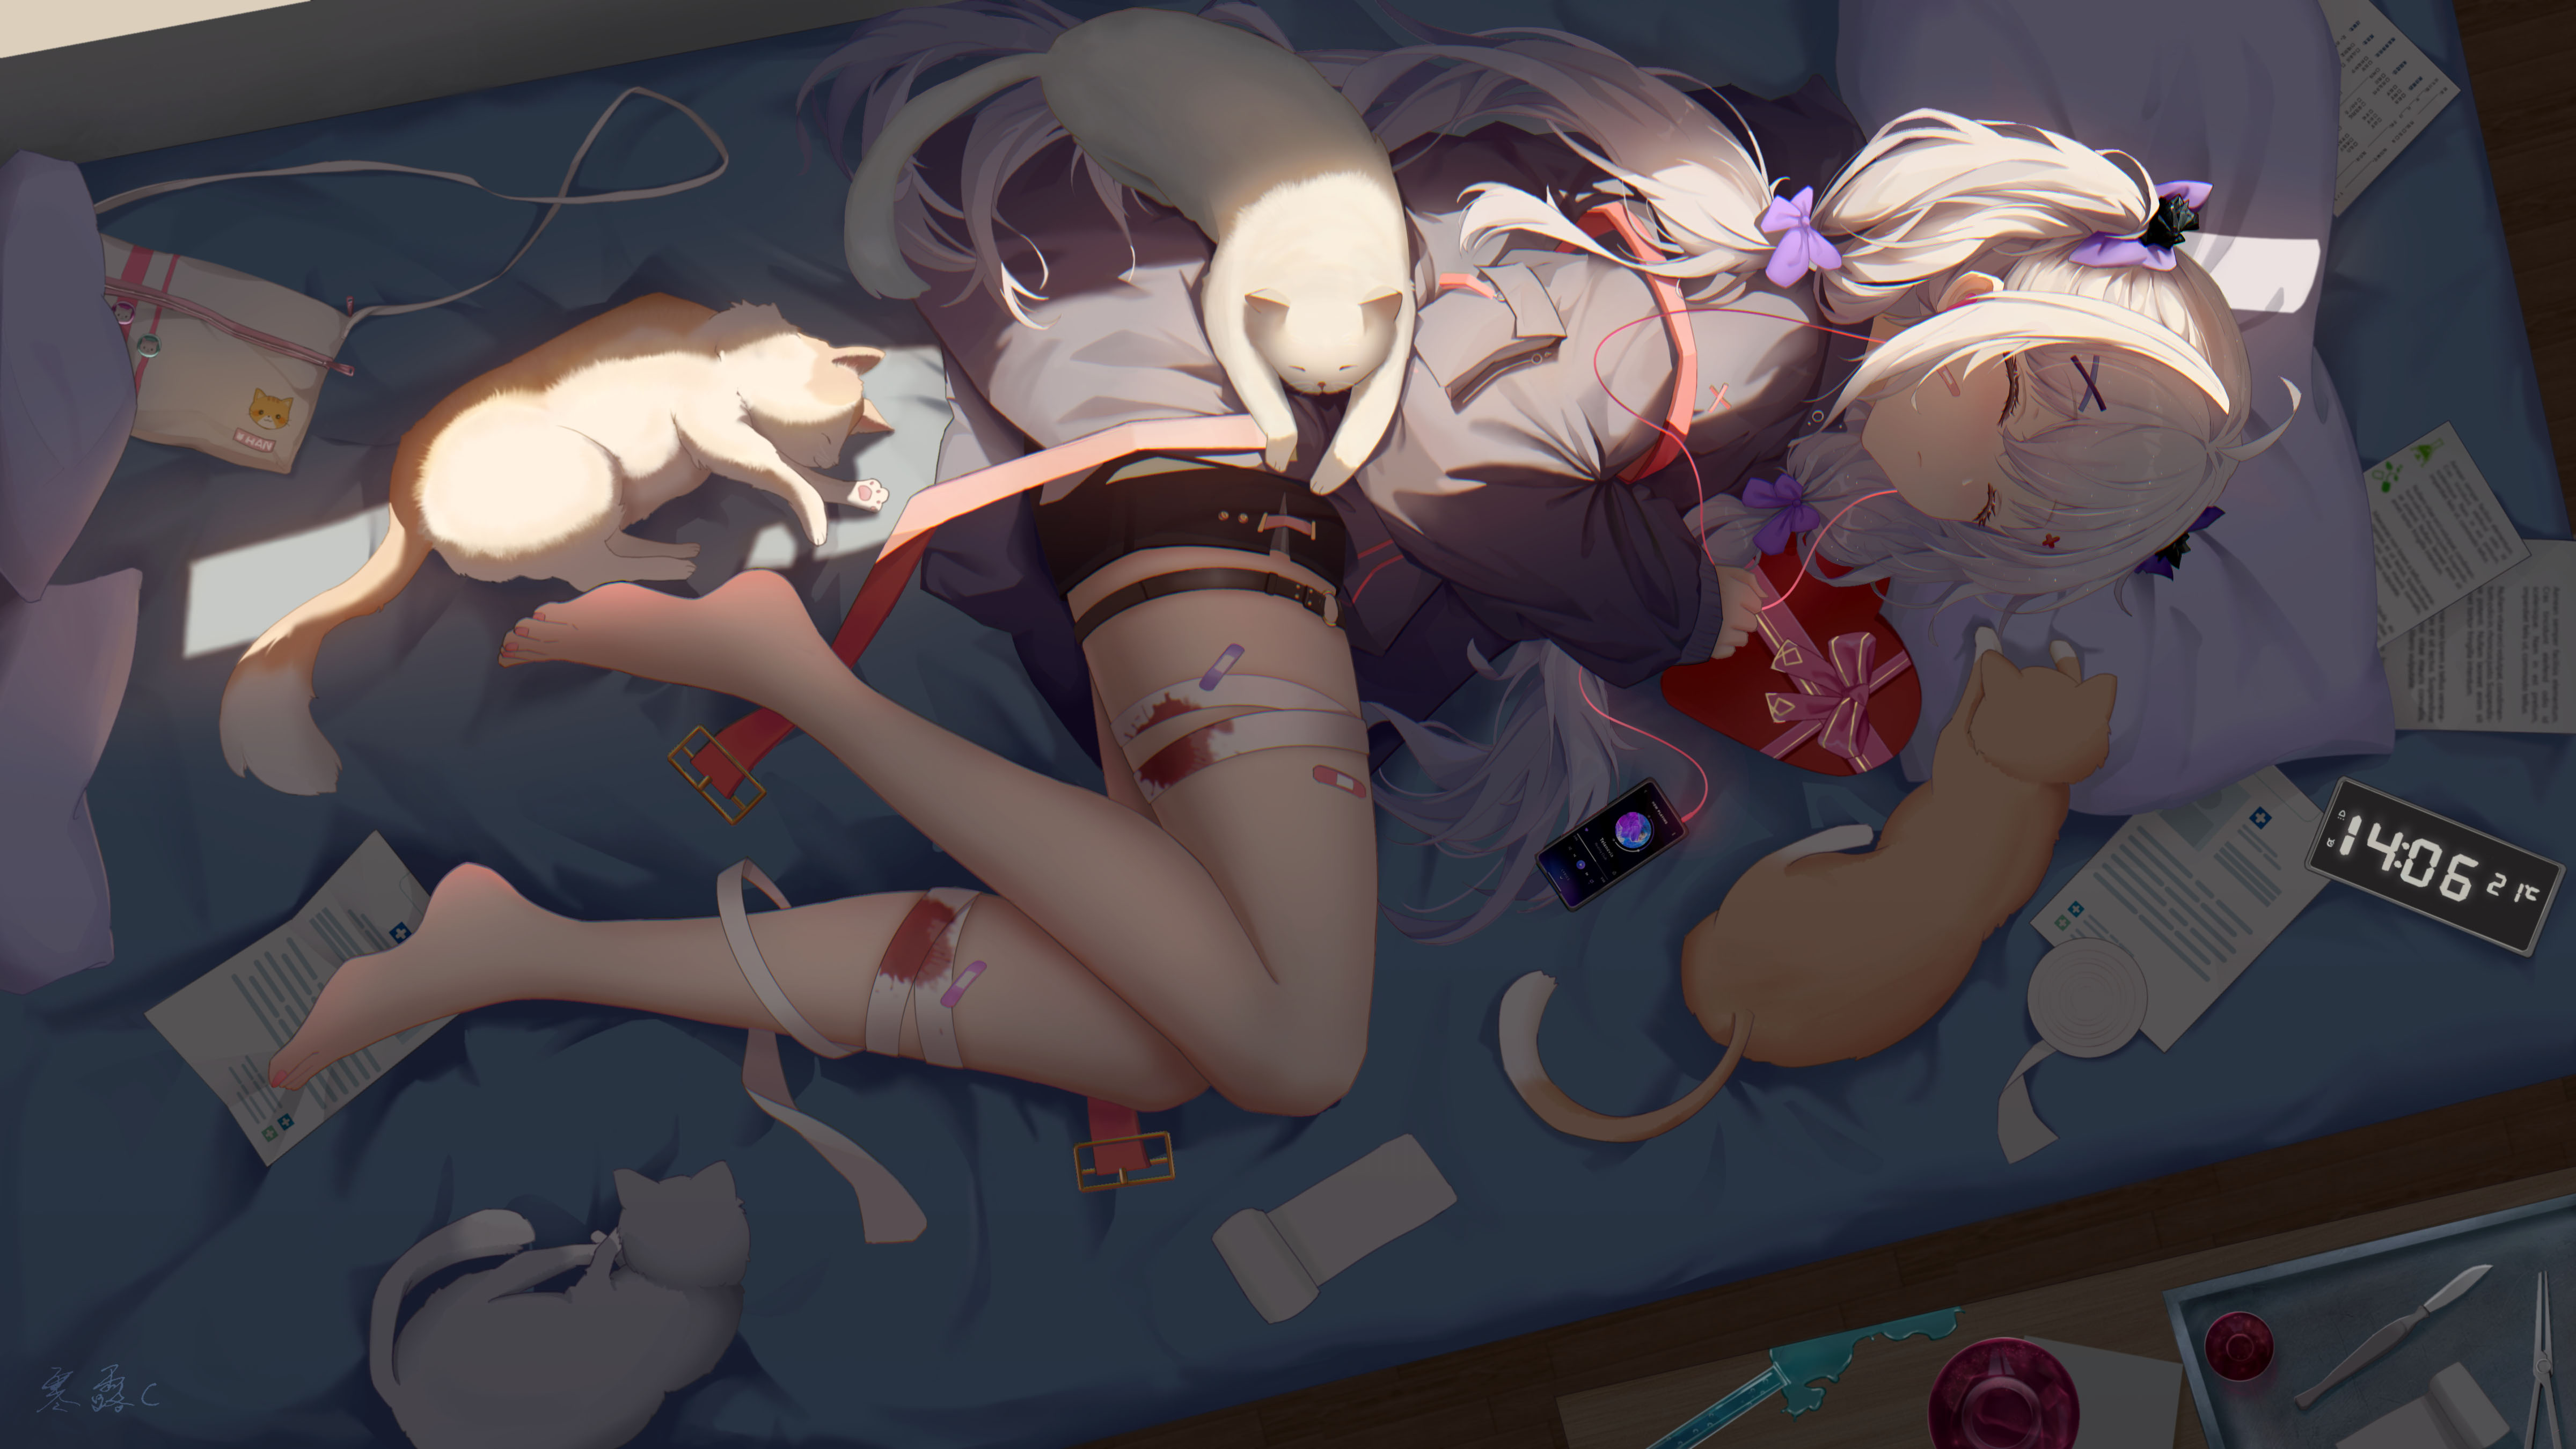 Anime 4800x2700 anime bed cats bandages blood smartphone sleeping lying on side white hair long hair handbags paper presents hair bows